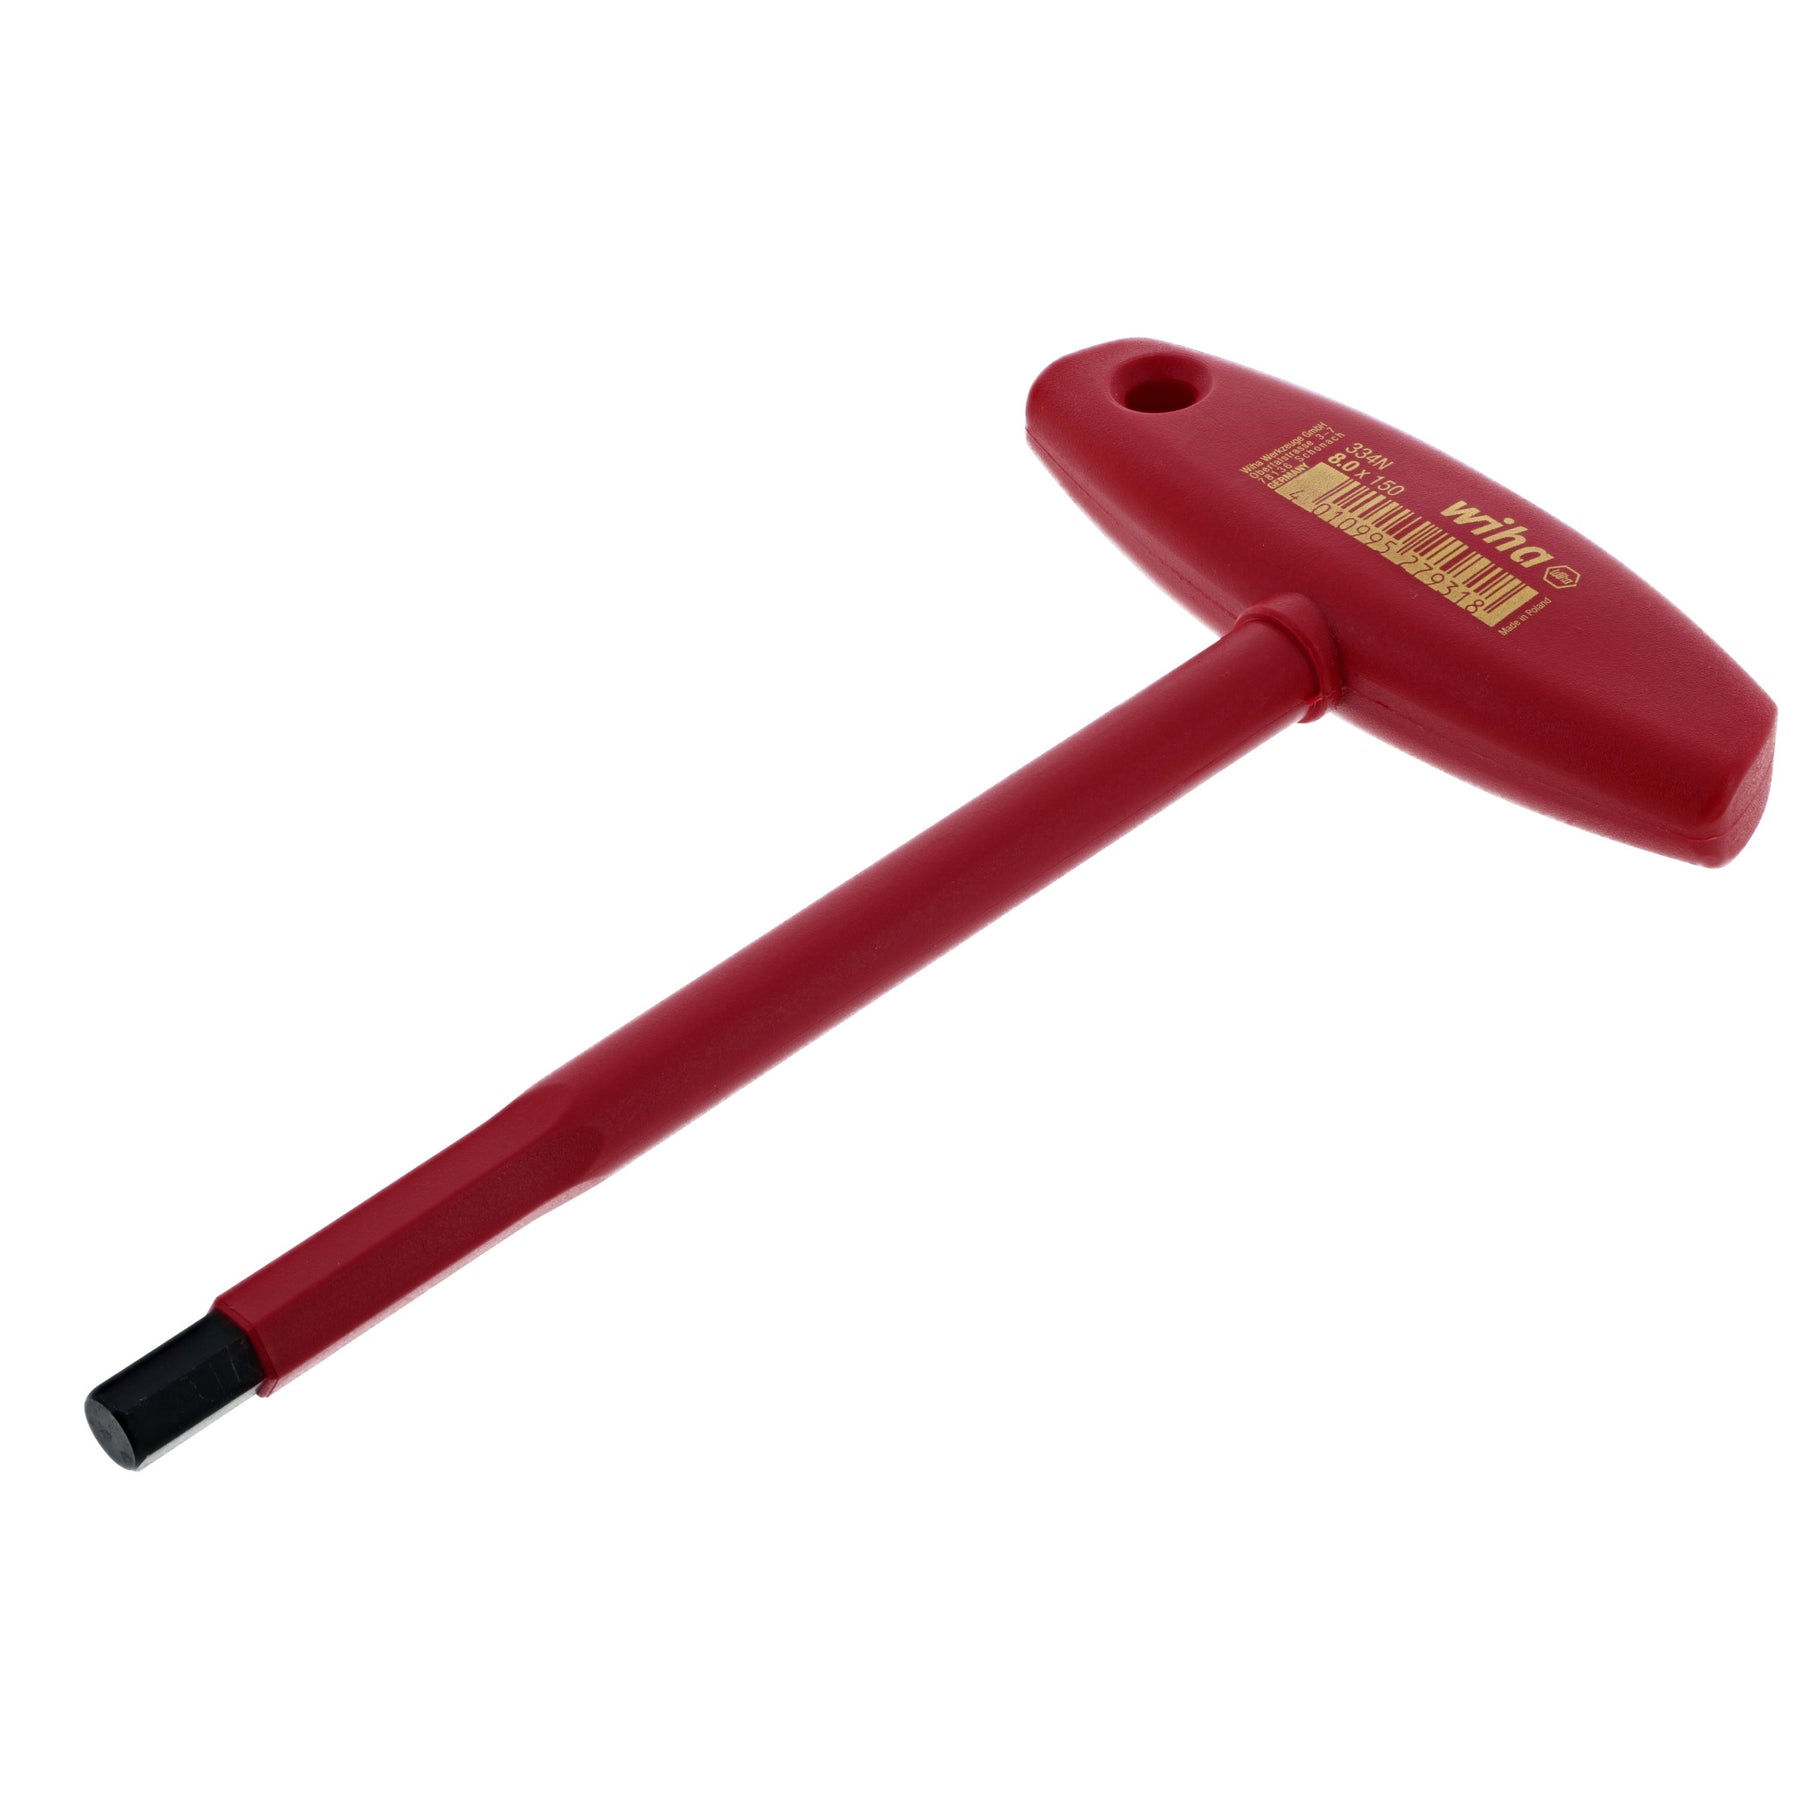 Insulated T-Handle Hex 8.0mm